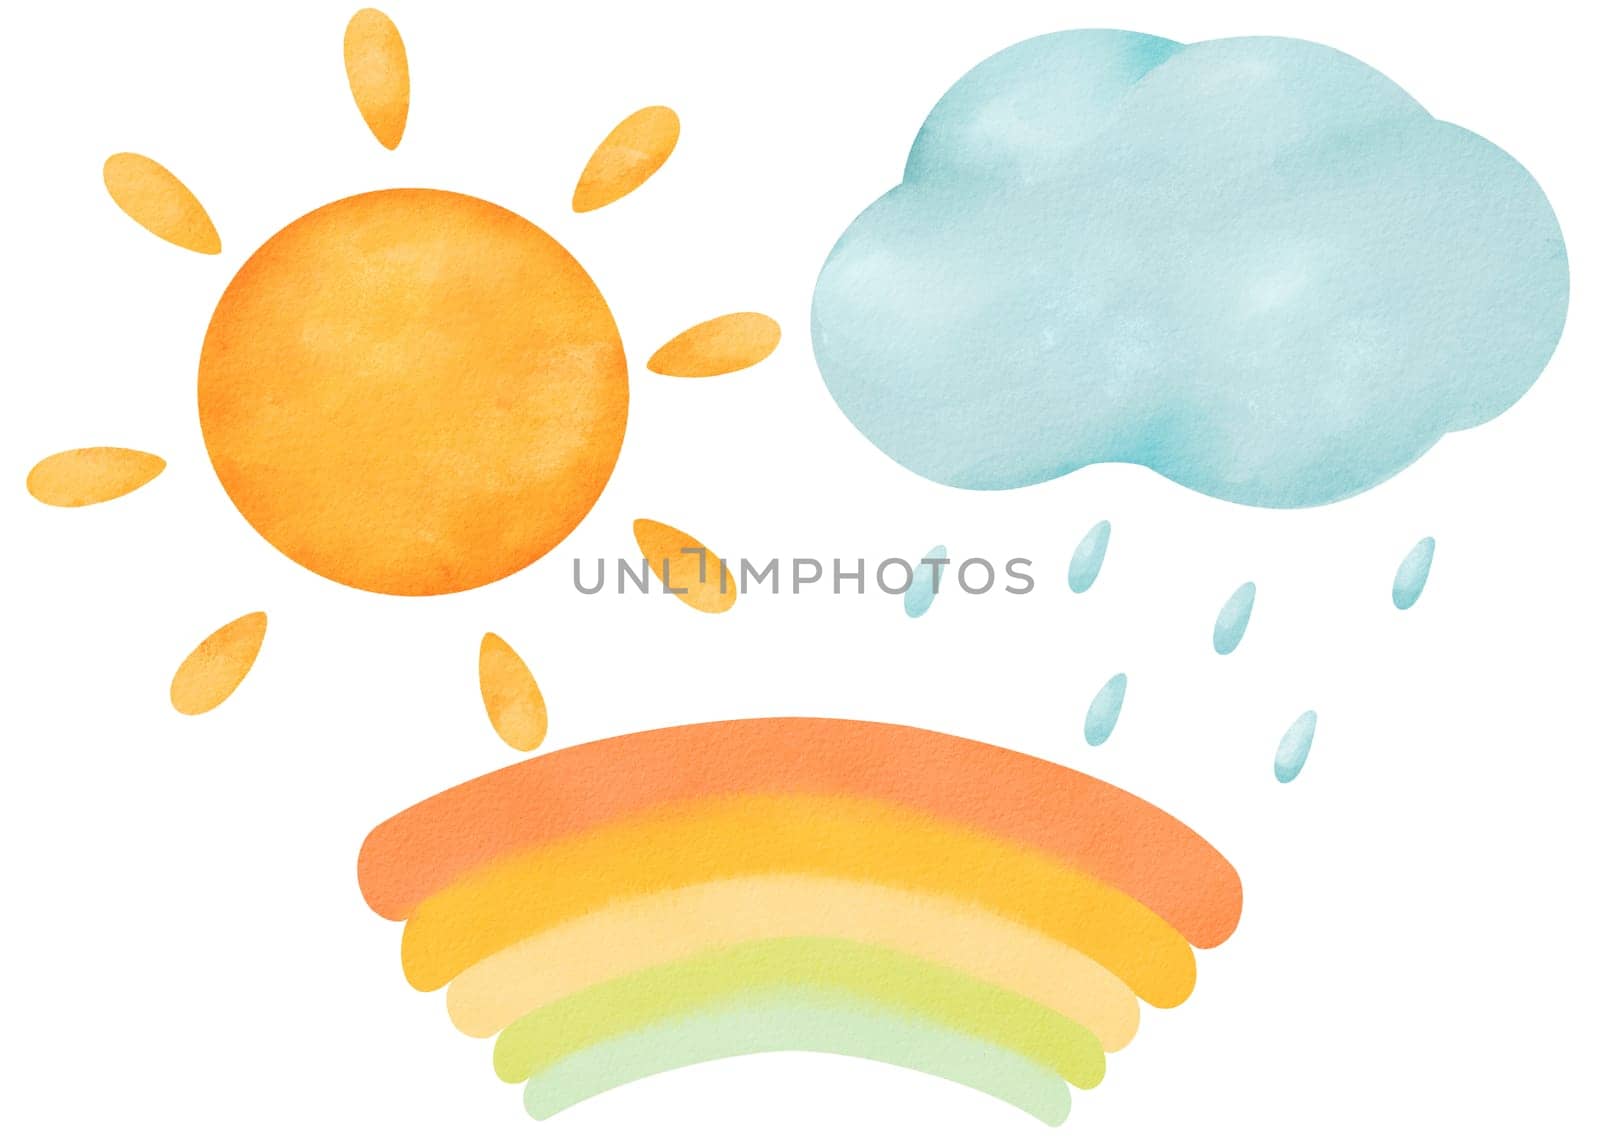 Watercolor set. a bright sun, a rainy cloud, and a colorful rainbow in a cartoon style. for children's books, weather forecasts, greeting cards, and design that needs a dash of joy and nature's beauty.